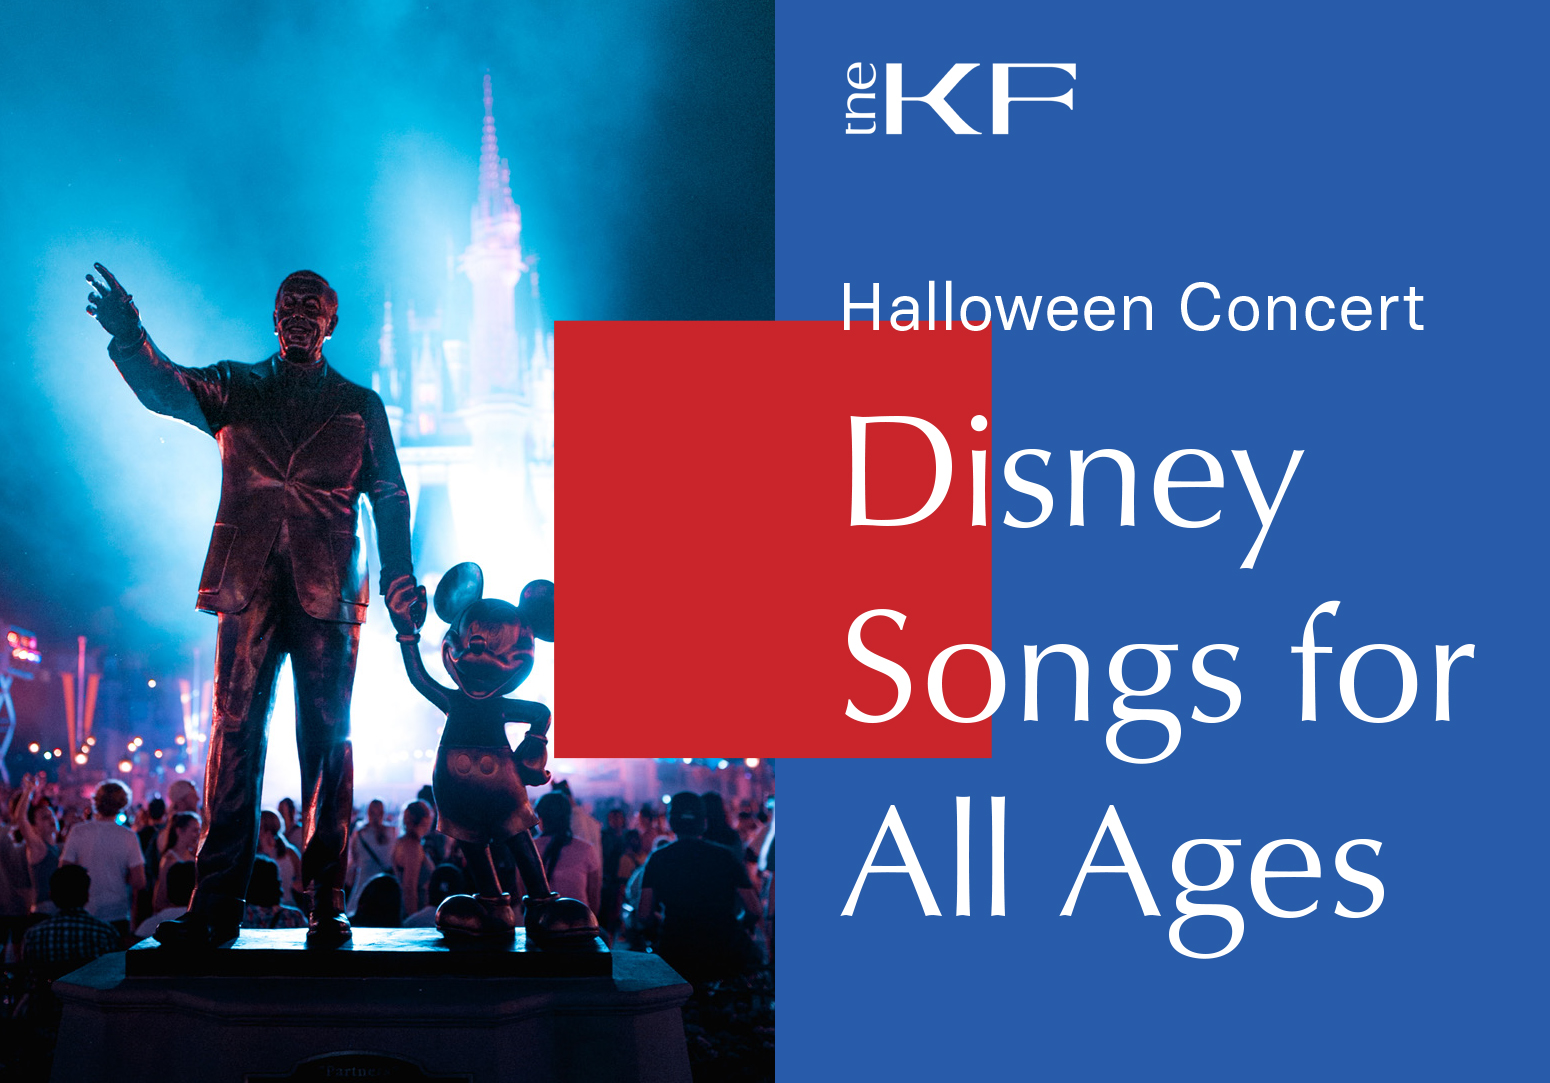 Halloween Concert. Disney Songs for All Ages at Kosciuszko Foundation DC. - CANCELED due to the sickness of the vocalist.